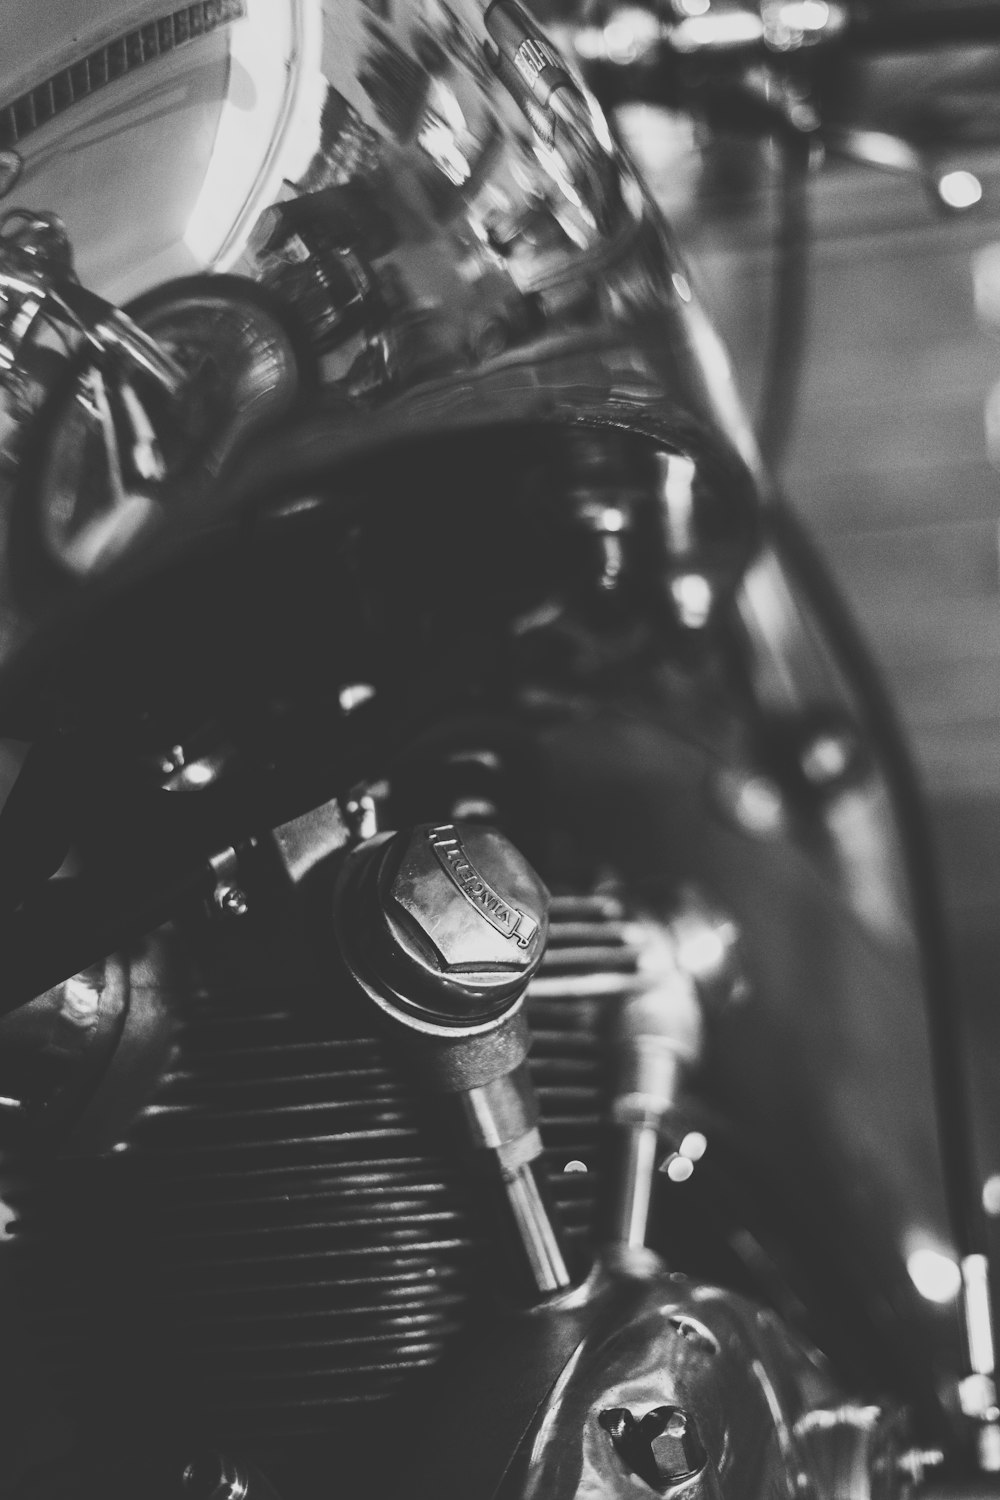 black motorcycle engine in close up photography